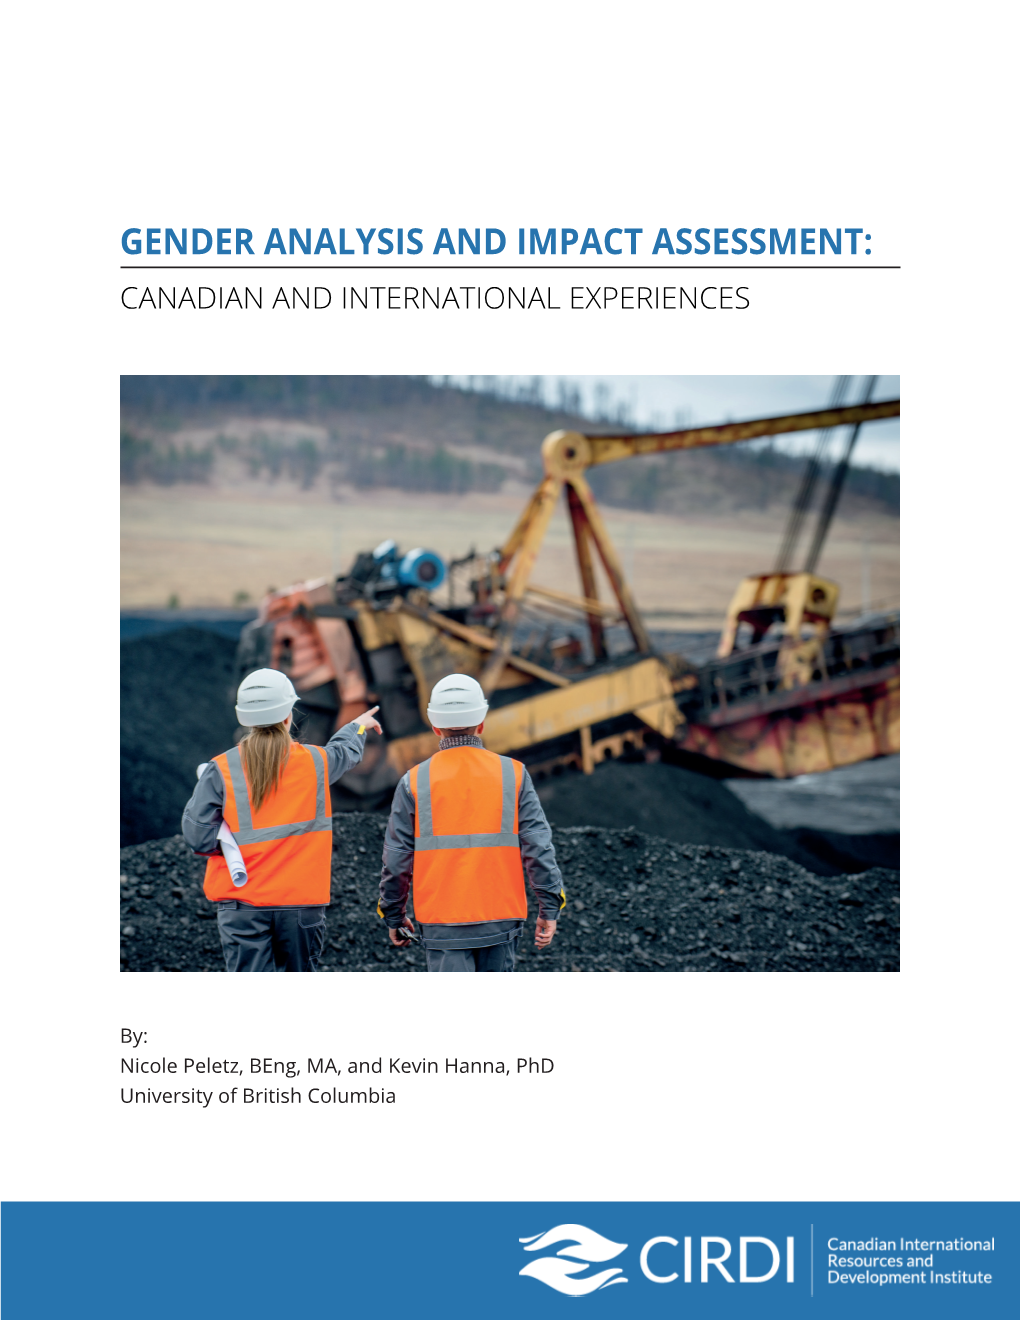 Gender Analysis and Impact Assessment: Canadian and International Experiences